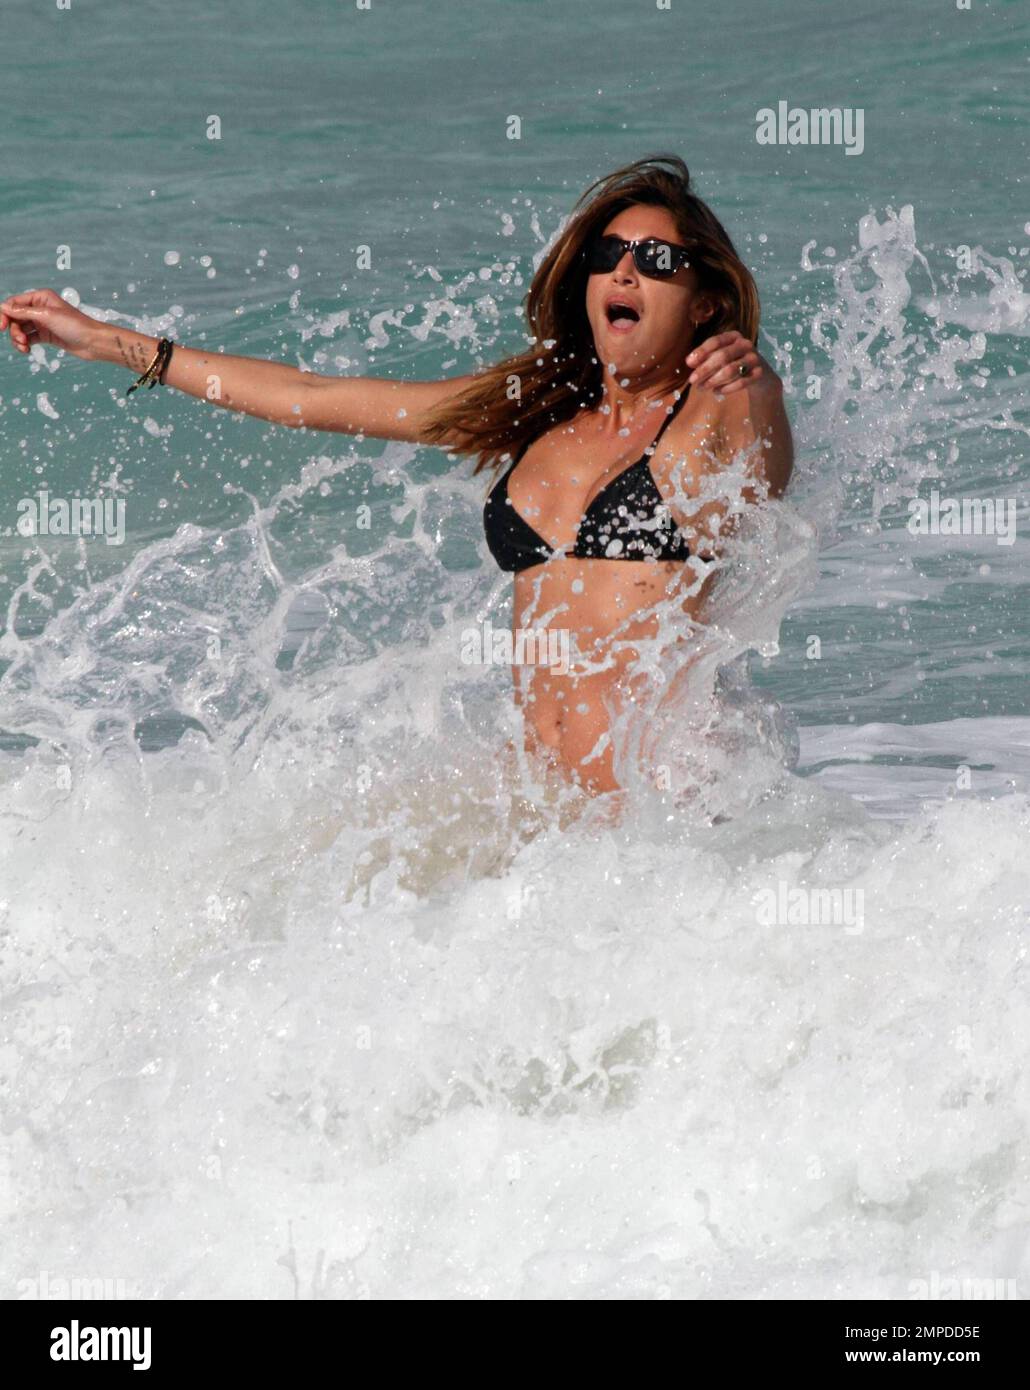 Bikini babe Belen Rodriguez appeared to have another bikini malfunction for the second day in a row. Yesterday her top had come adrift and today it seems her bottoms wouldn't behave. The Italian/Argentinian model relaxed beachside with pals and played in the surf. Miami, FL. 3/7/10.   . Stock Photo